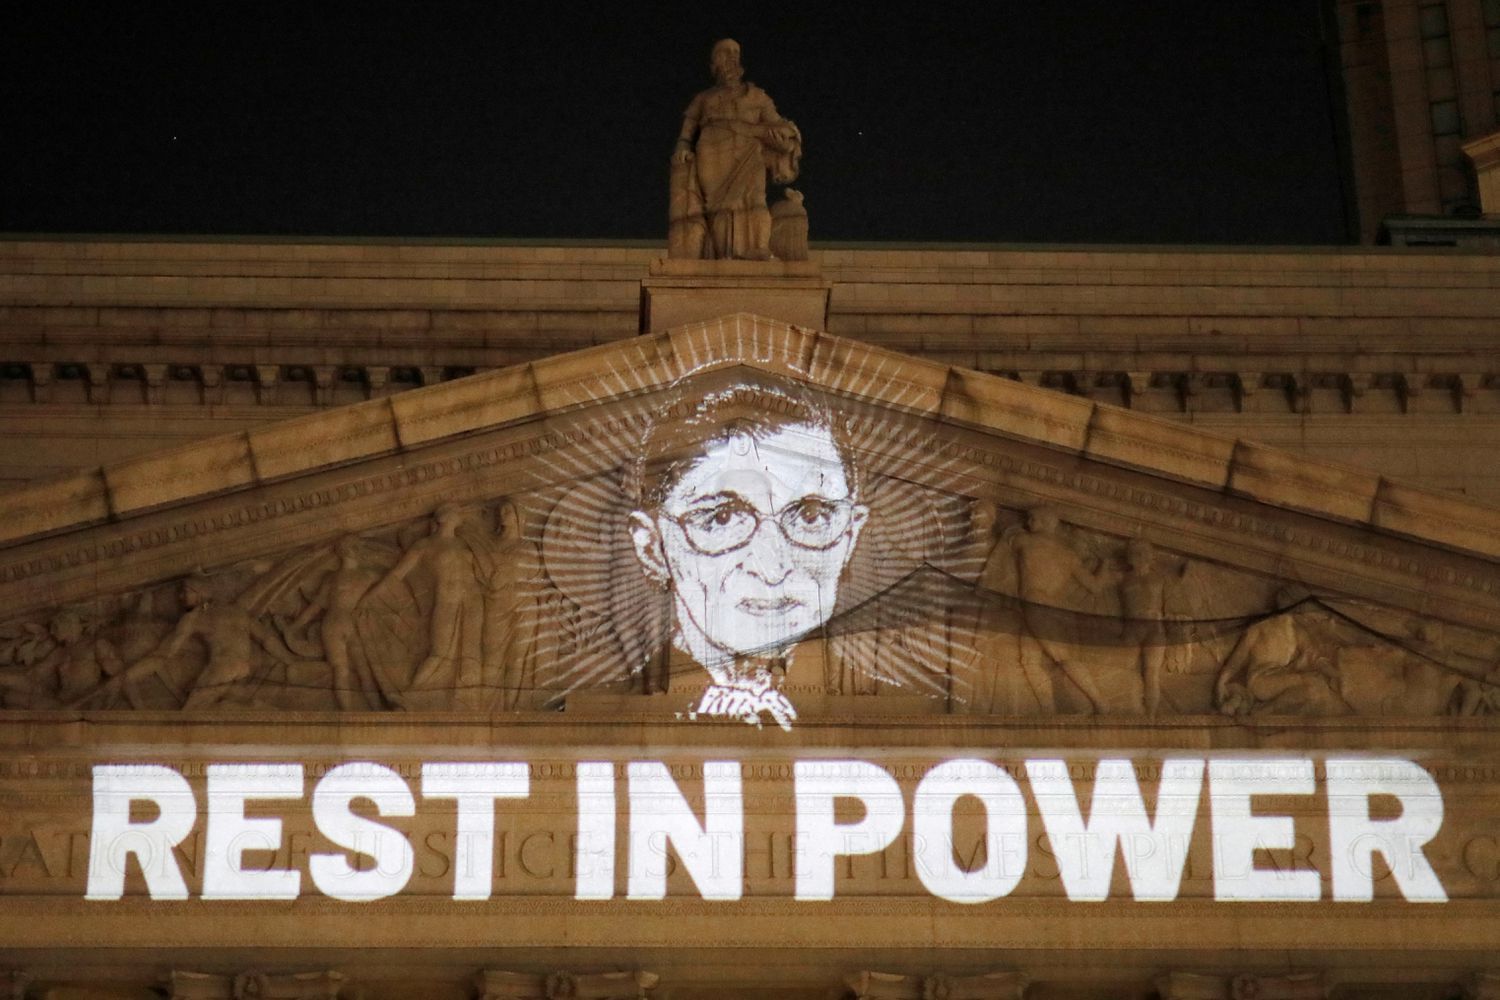 An image of Ruth Bader Ginsburg projected onto the New York State Civil Supreme Court building in Manhattan, New York City by Andrew Kelly